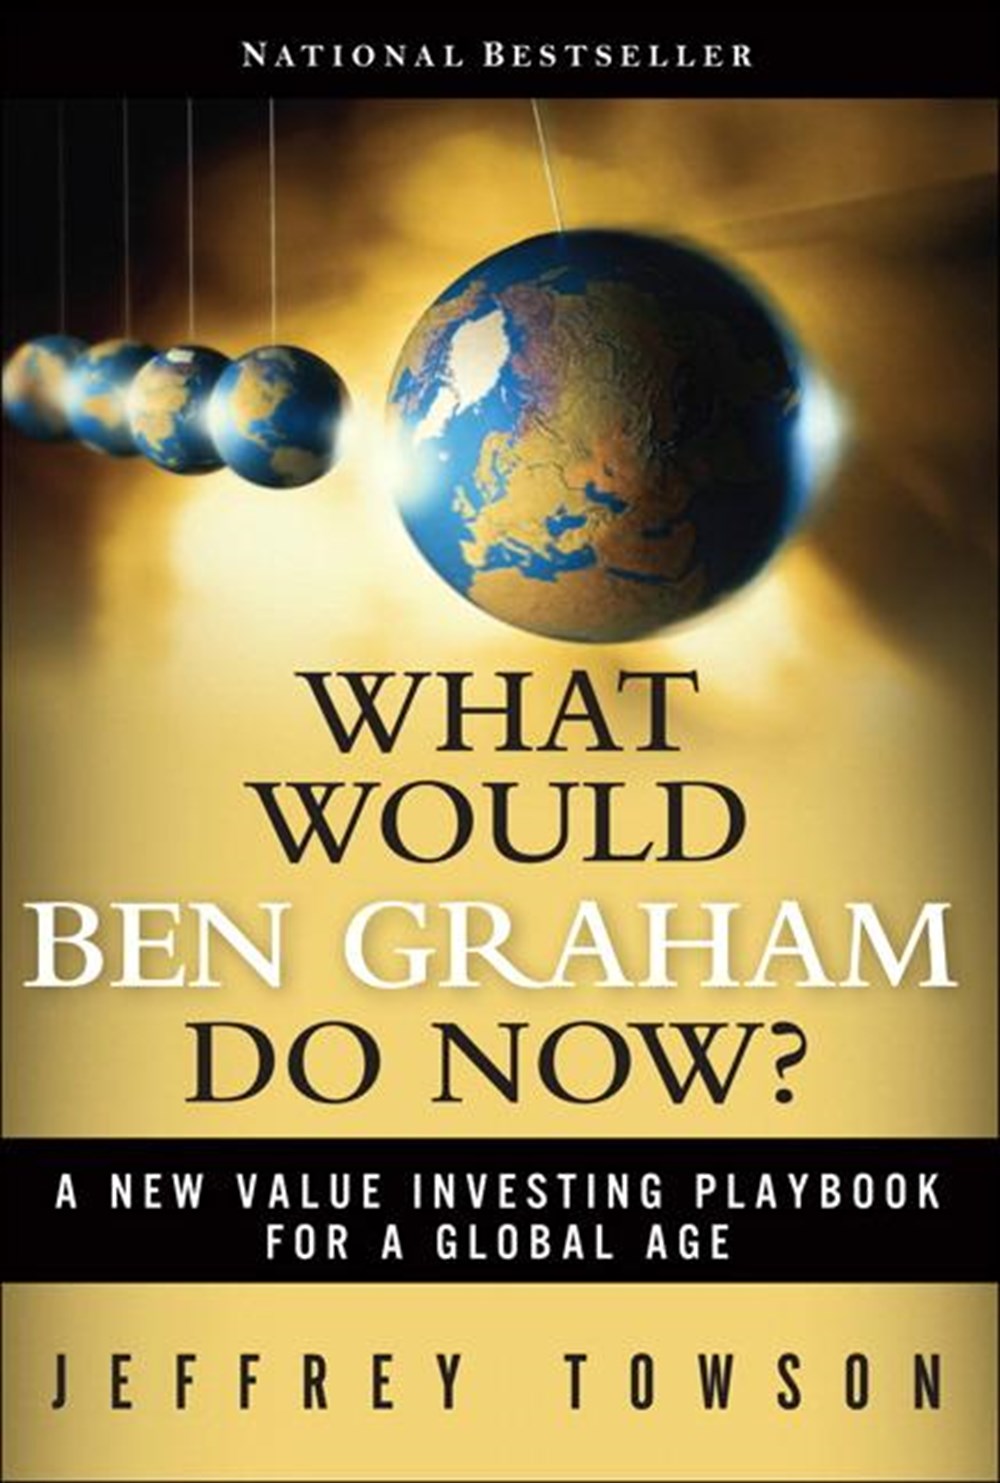 What Would Ben Graham Do Now? A New Value Investing Playbook for a Global Age